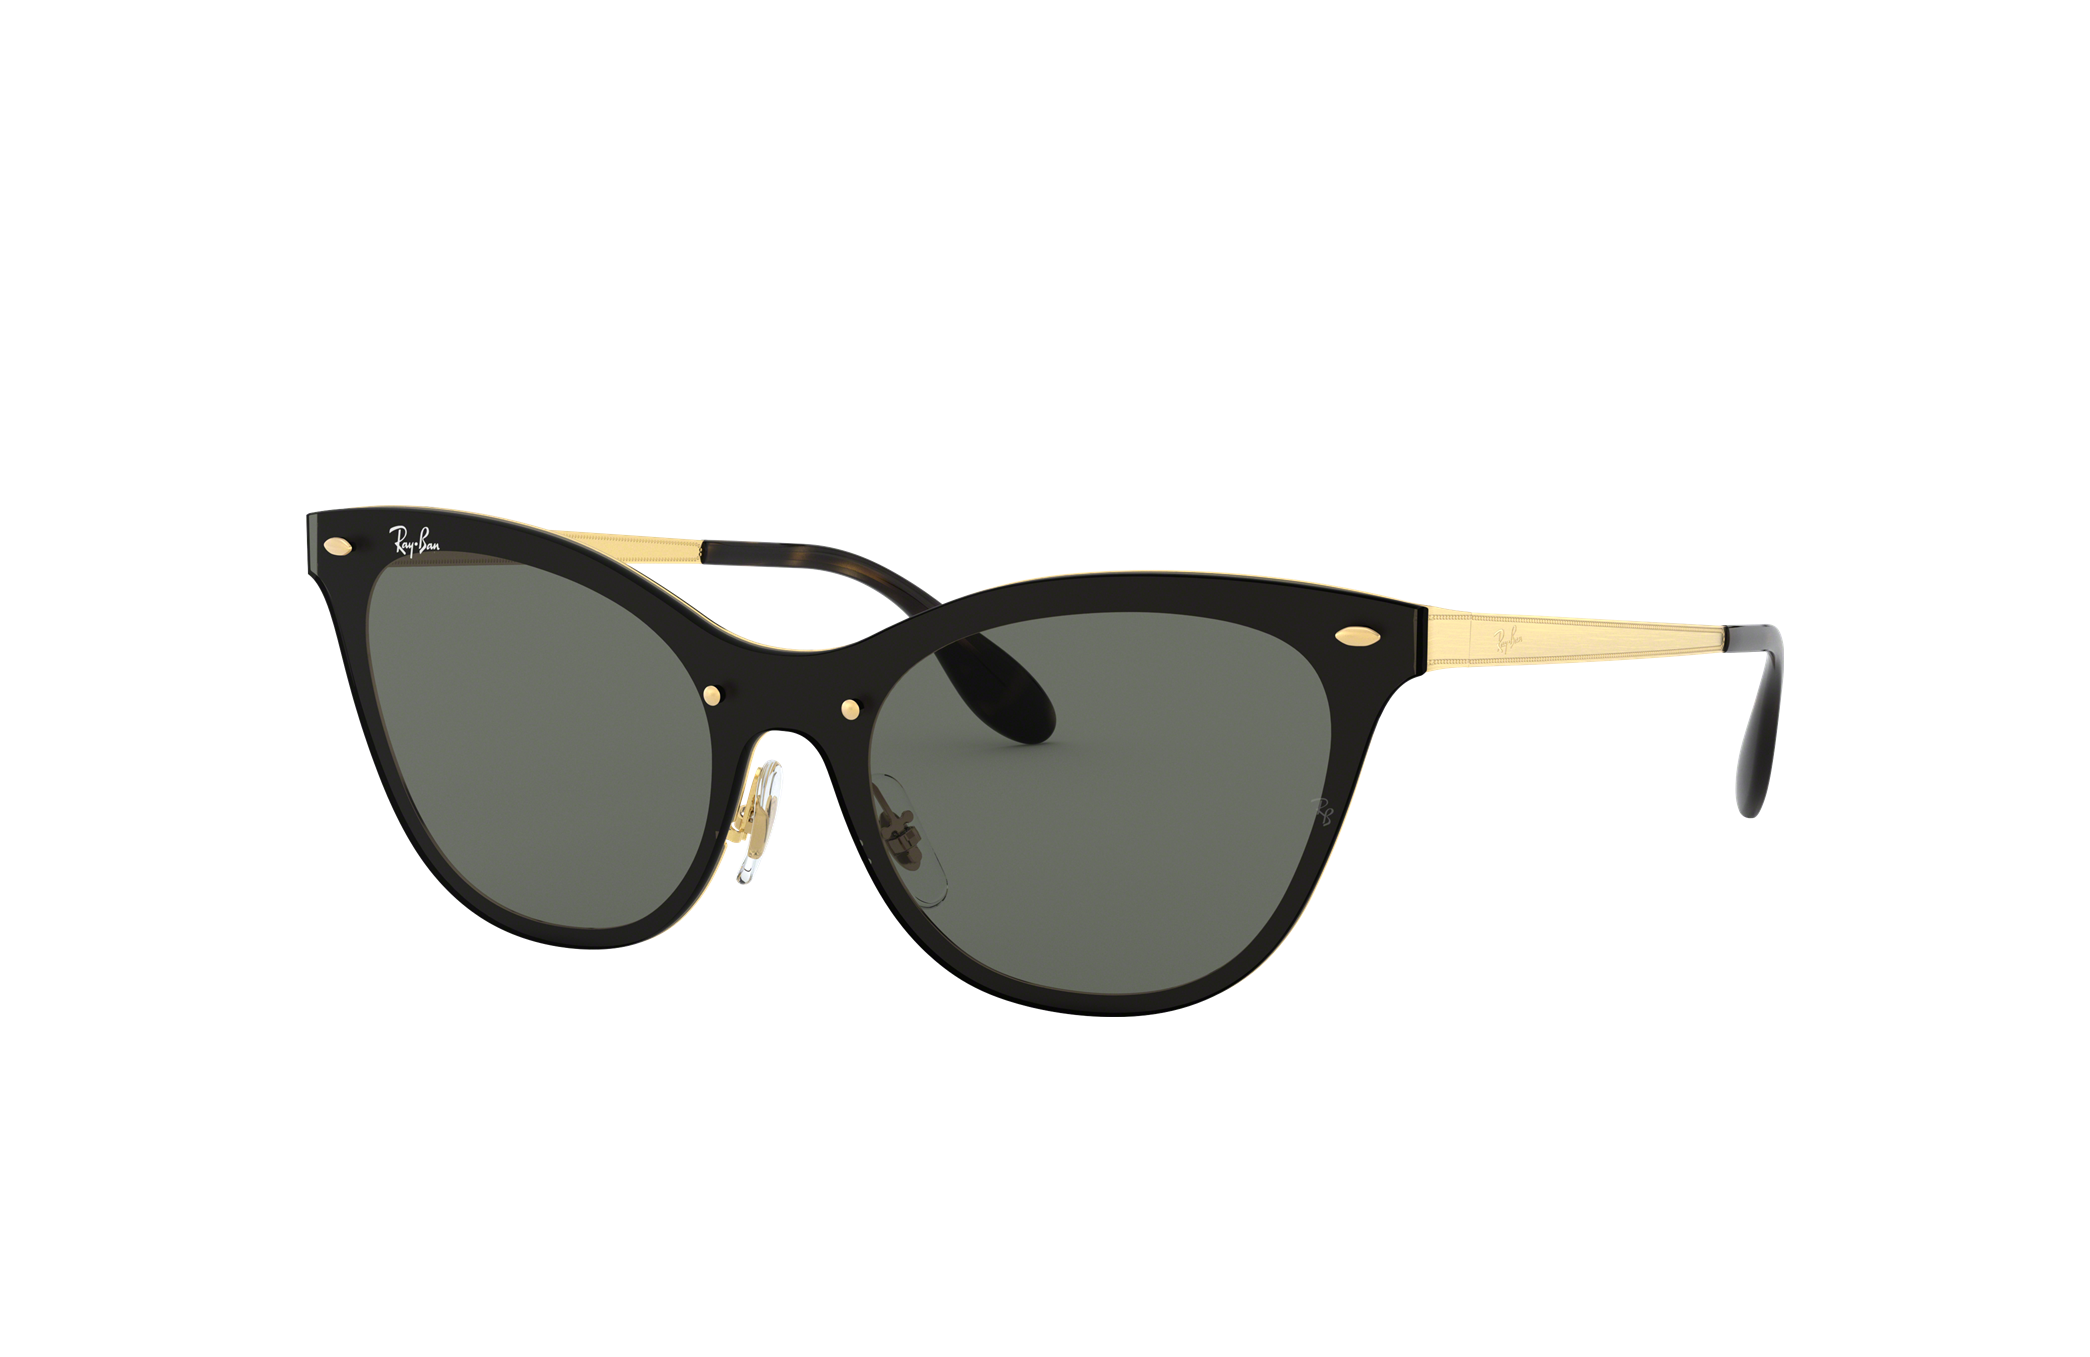 Cat Eye Ray Ban Glasses Sweden, SAVE 60% 